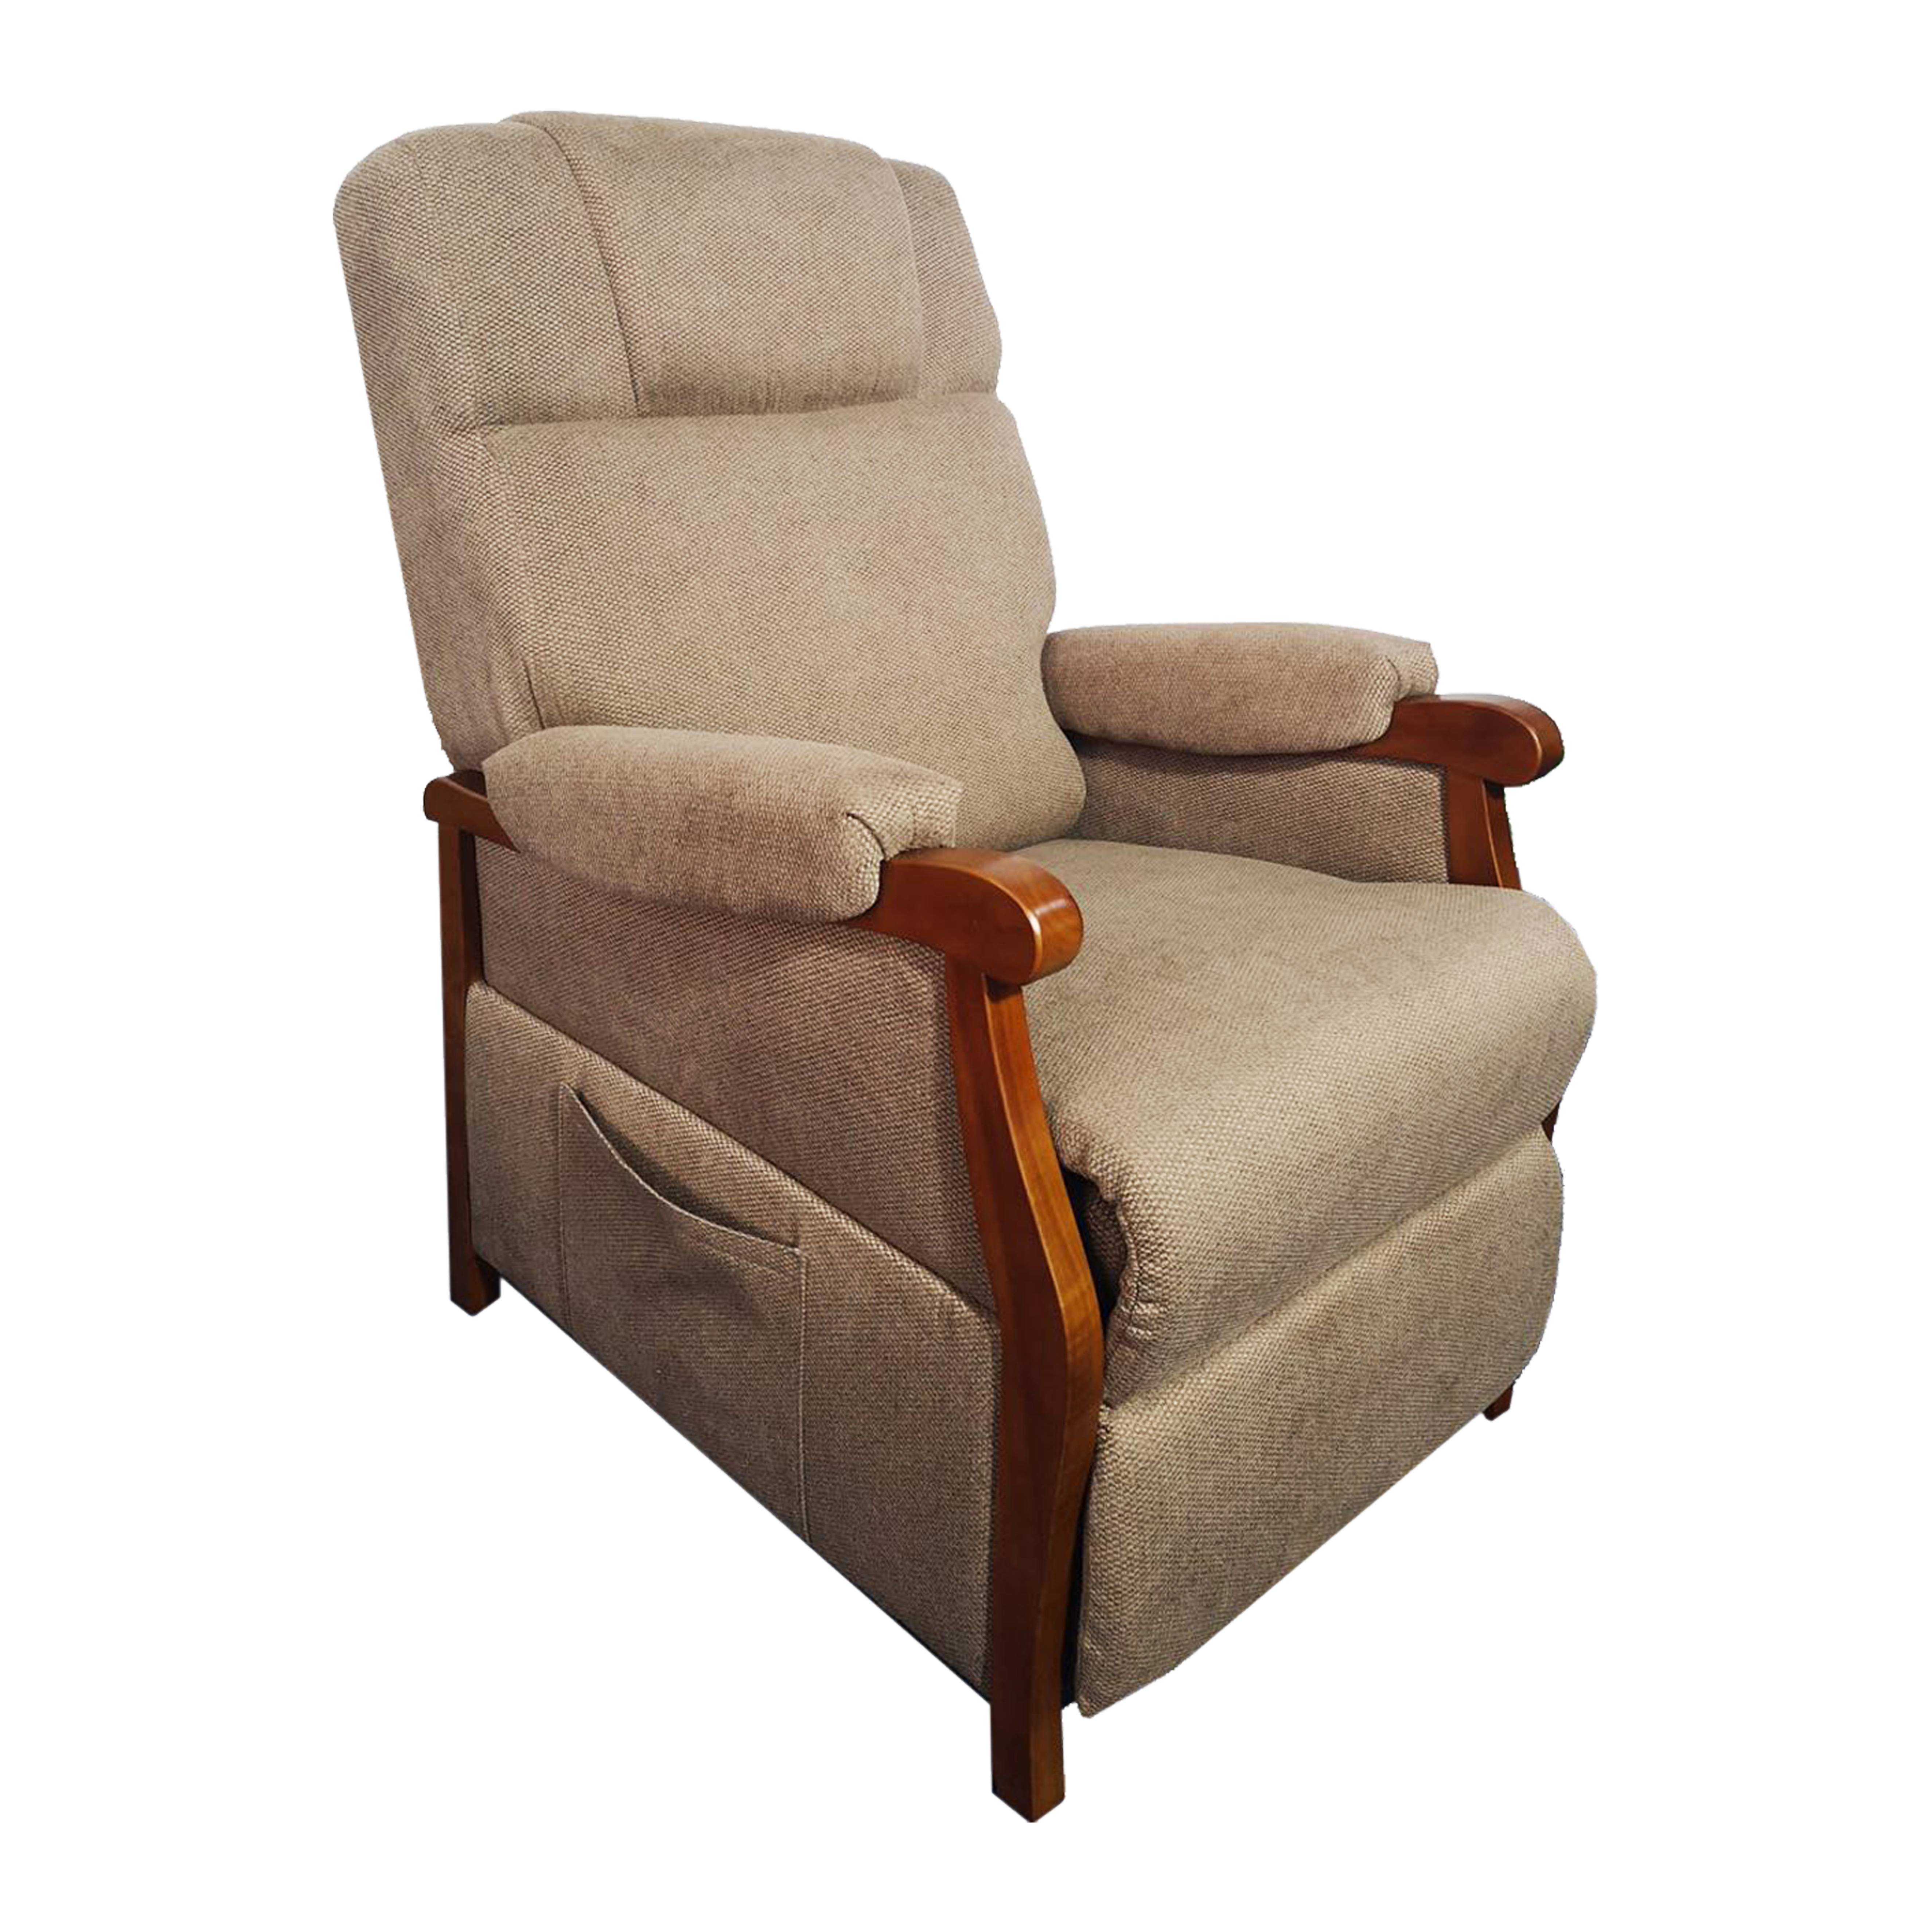 BME 004 Electric Recliner Elderly Lift Chair Recliner with High Quality 